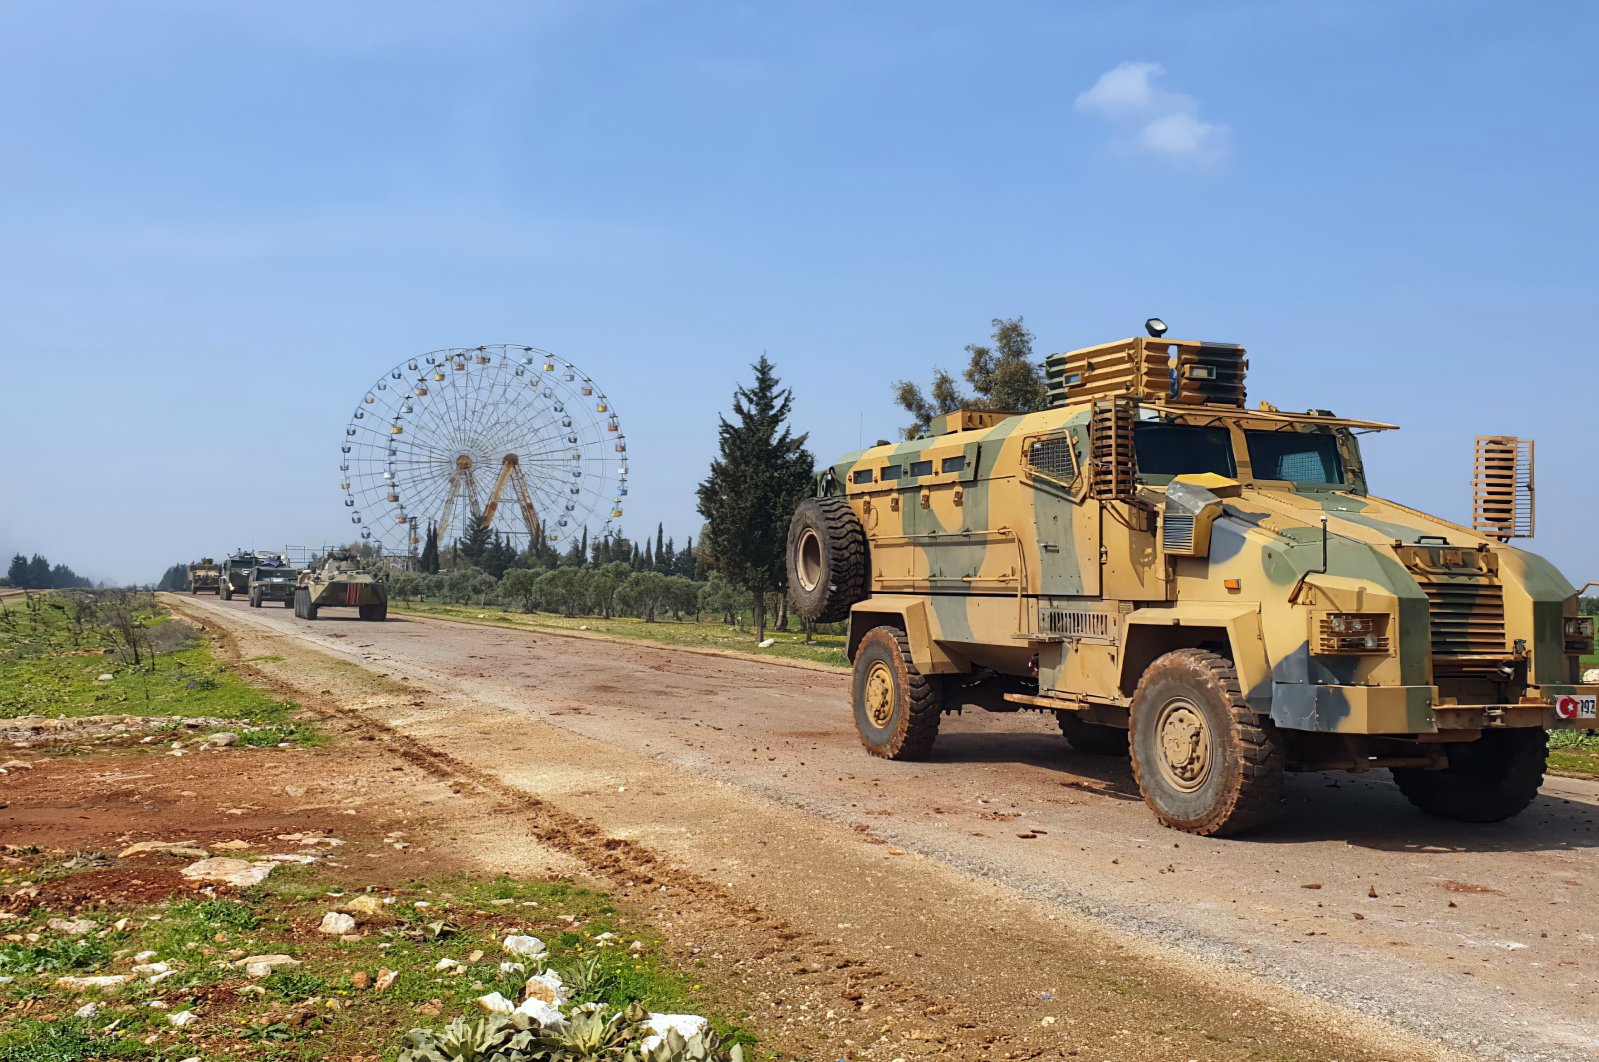 Turkish and Russian troops patrol on the M4 highway, which runs east-west through Idlib province, Syria, March 15, 2020. (AP Photo)